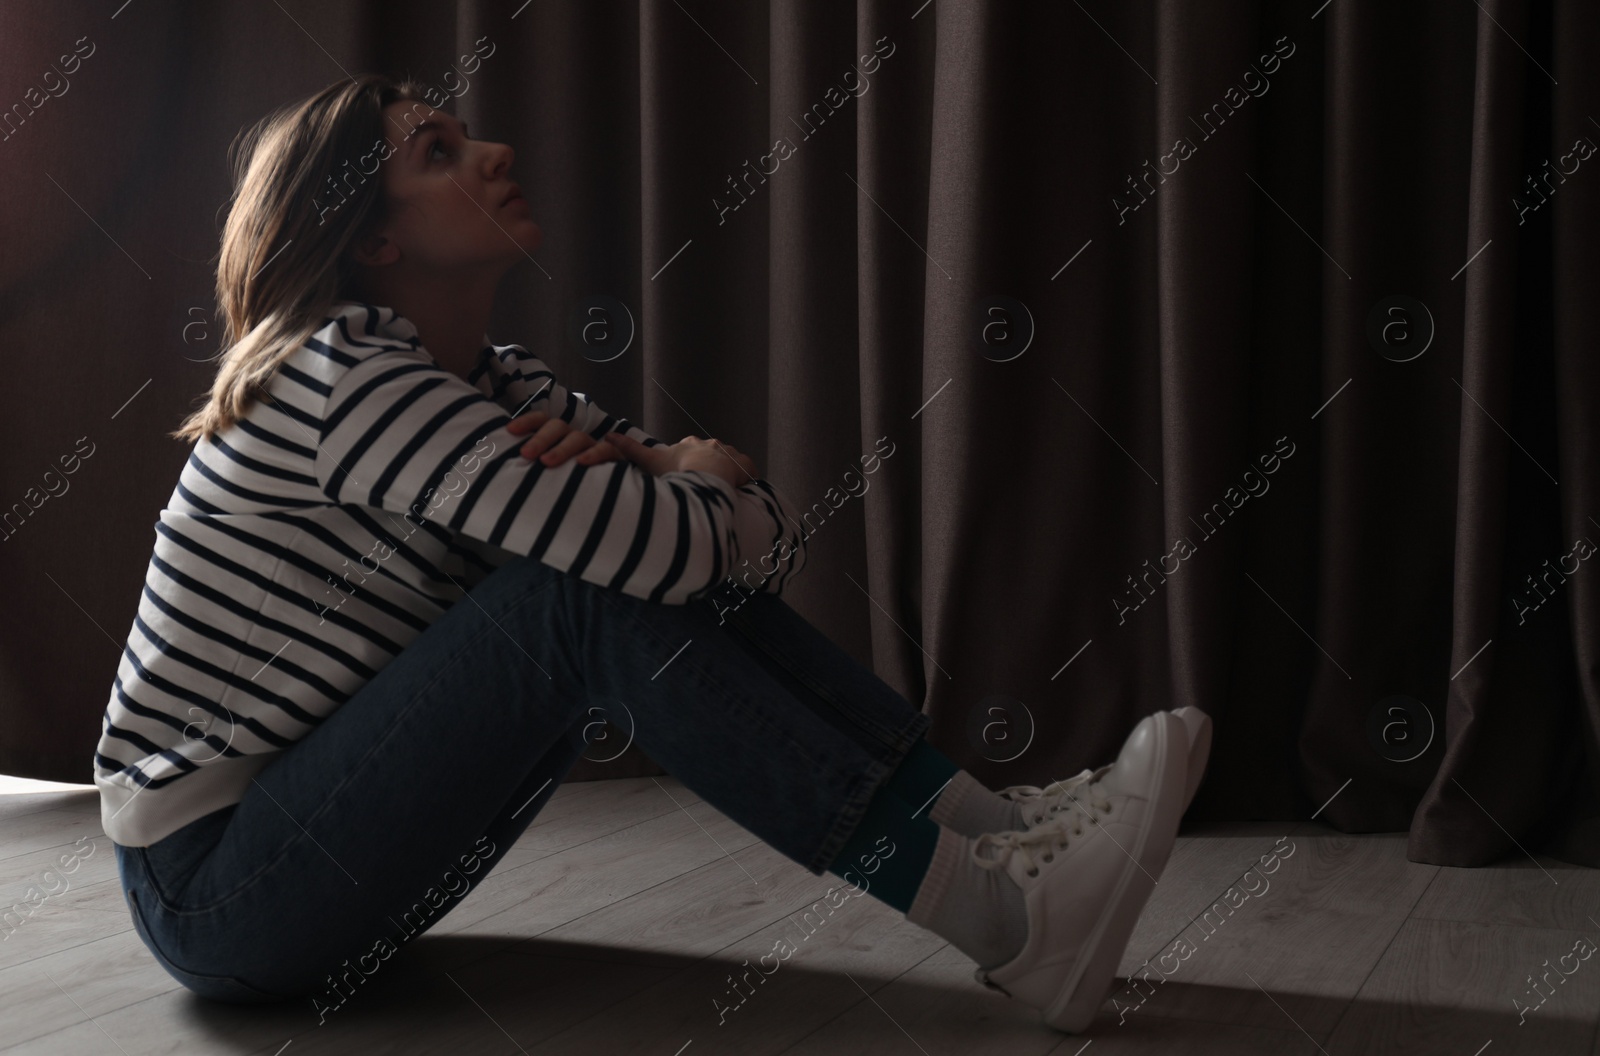 Photo of Sad young woman sitting on floor indoors, space for text